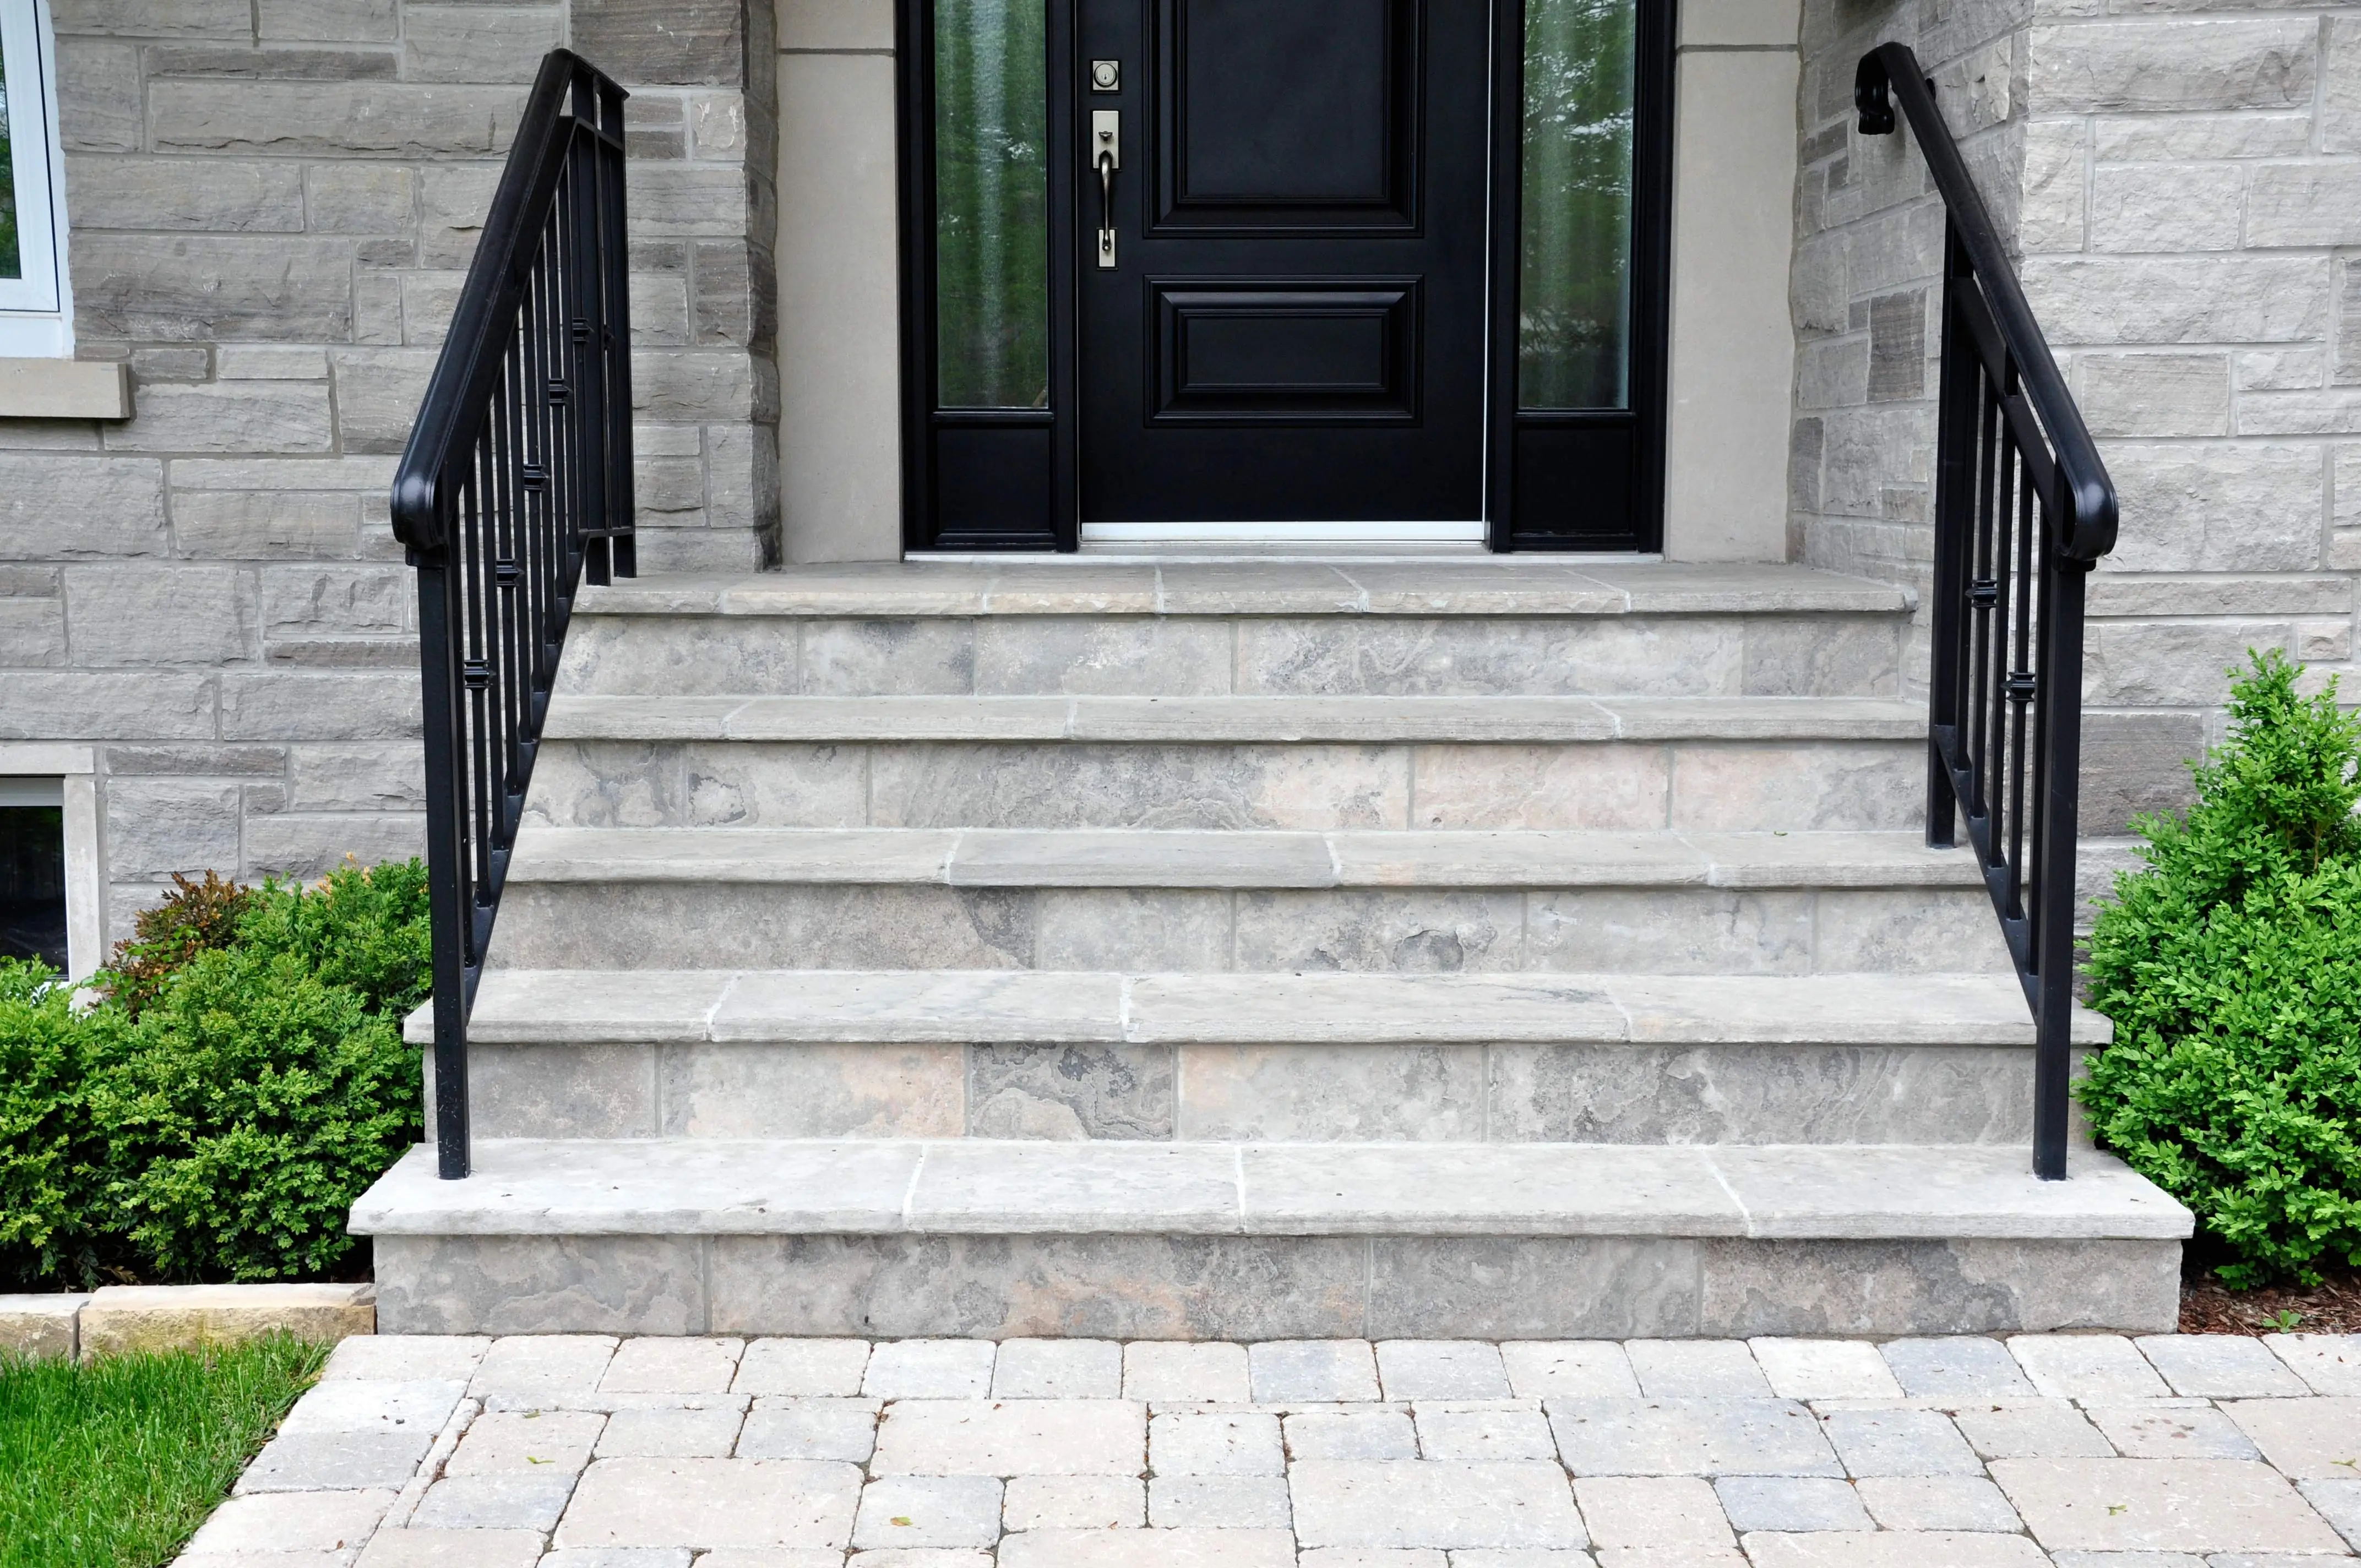 Front steps and landing with black railings constructed by experienced masonry contractors in Mt. Airy.